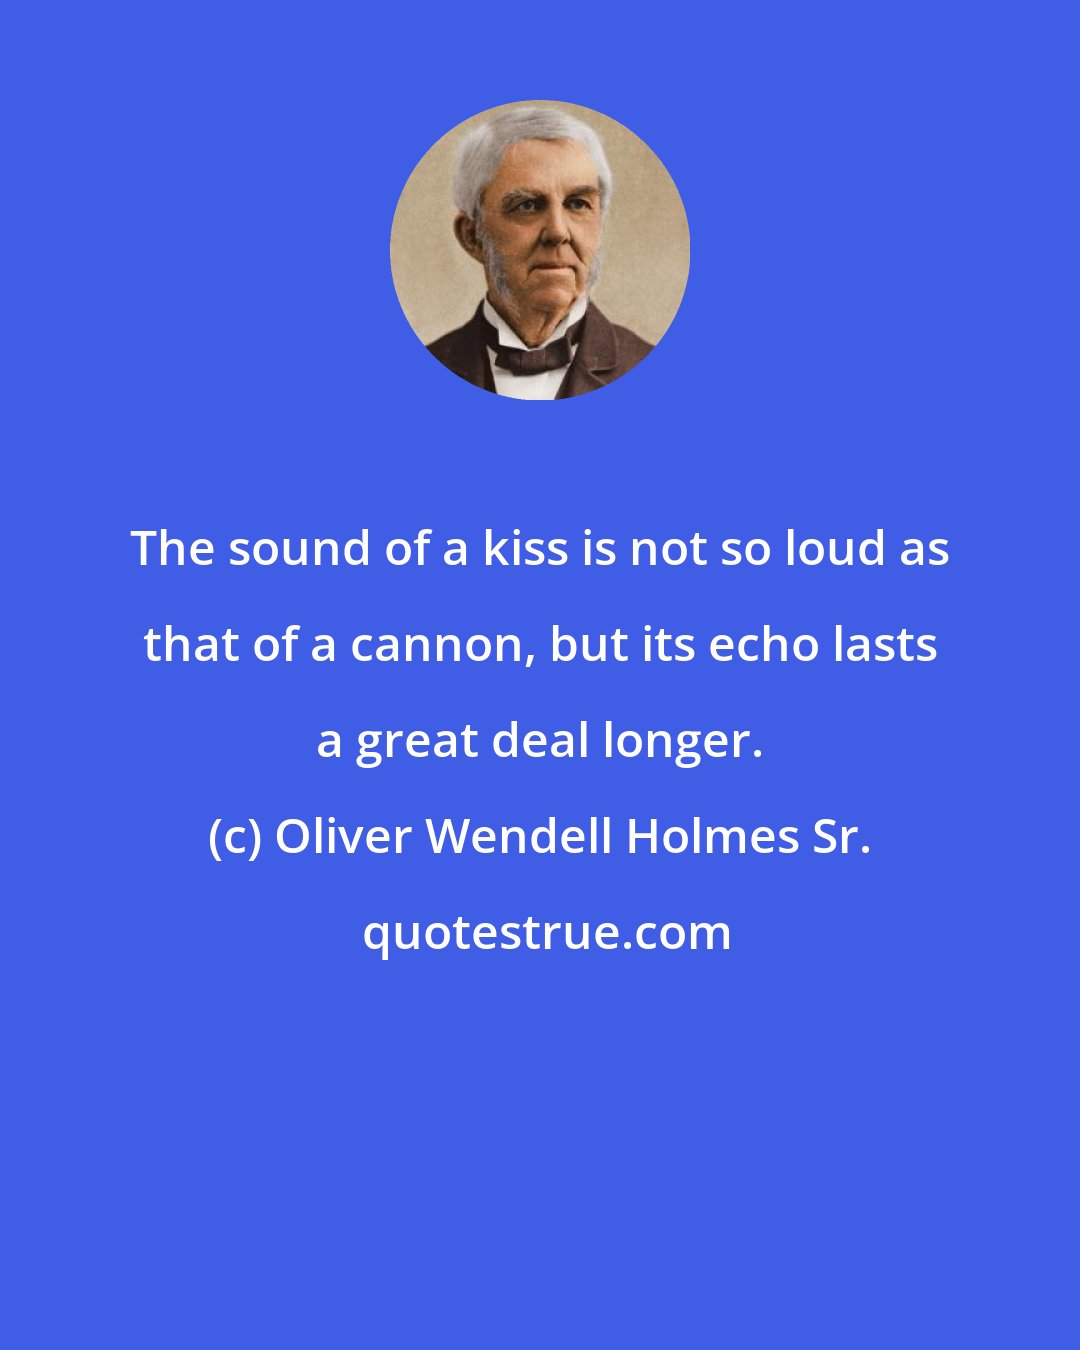 Oliver Wendell Holmes Sr.: The sound of a kiss is not so loud as that of a cannon, but its echo lasts a great deal longer.